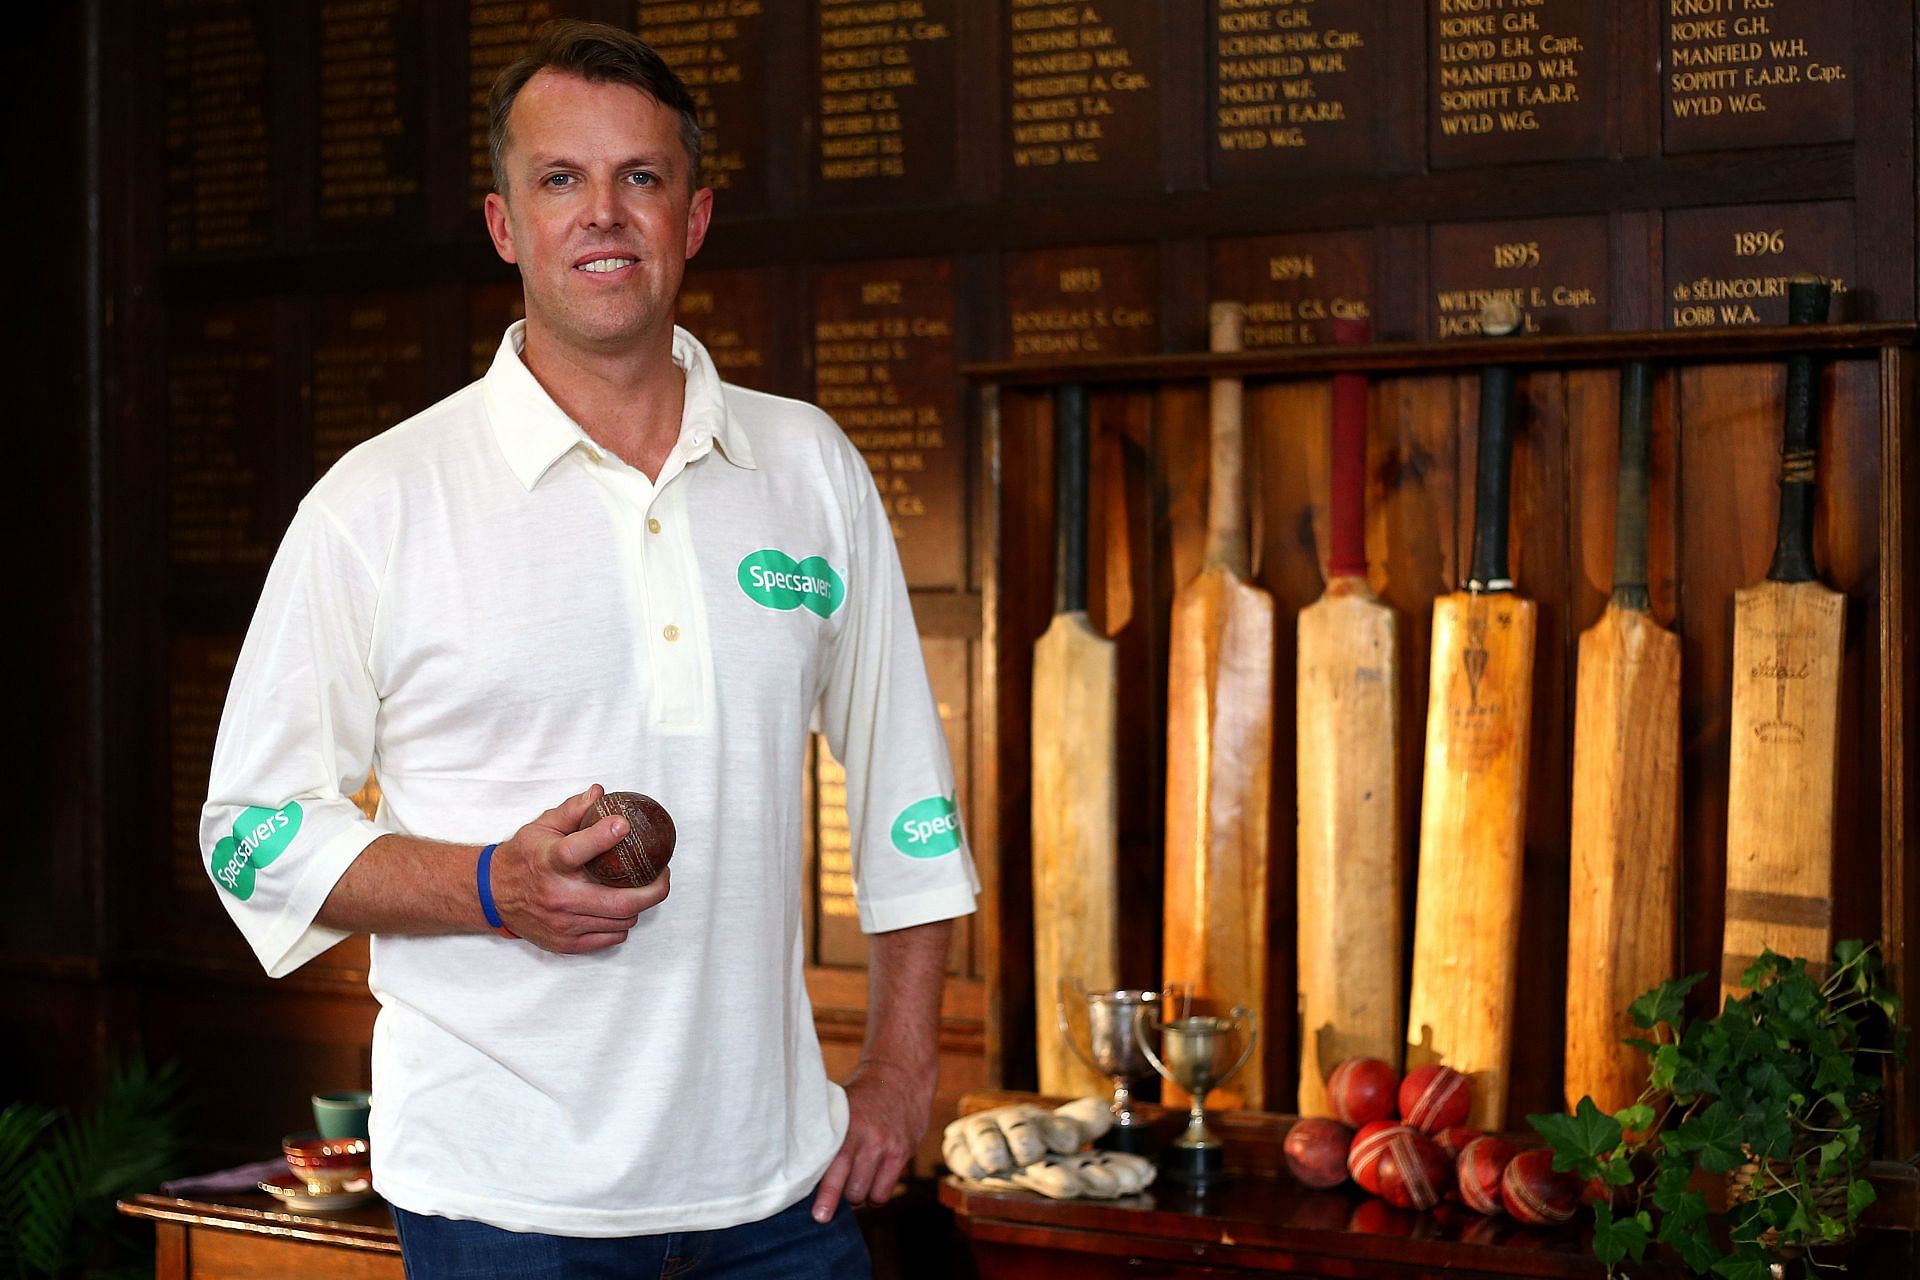 Graeme Swann is among the greatest English spinners of all time